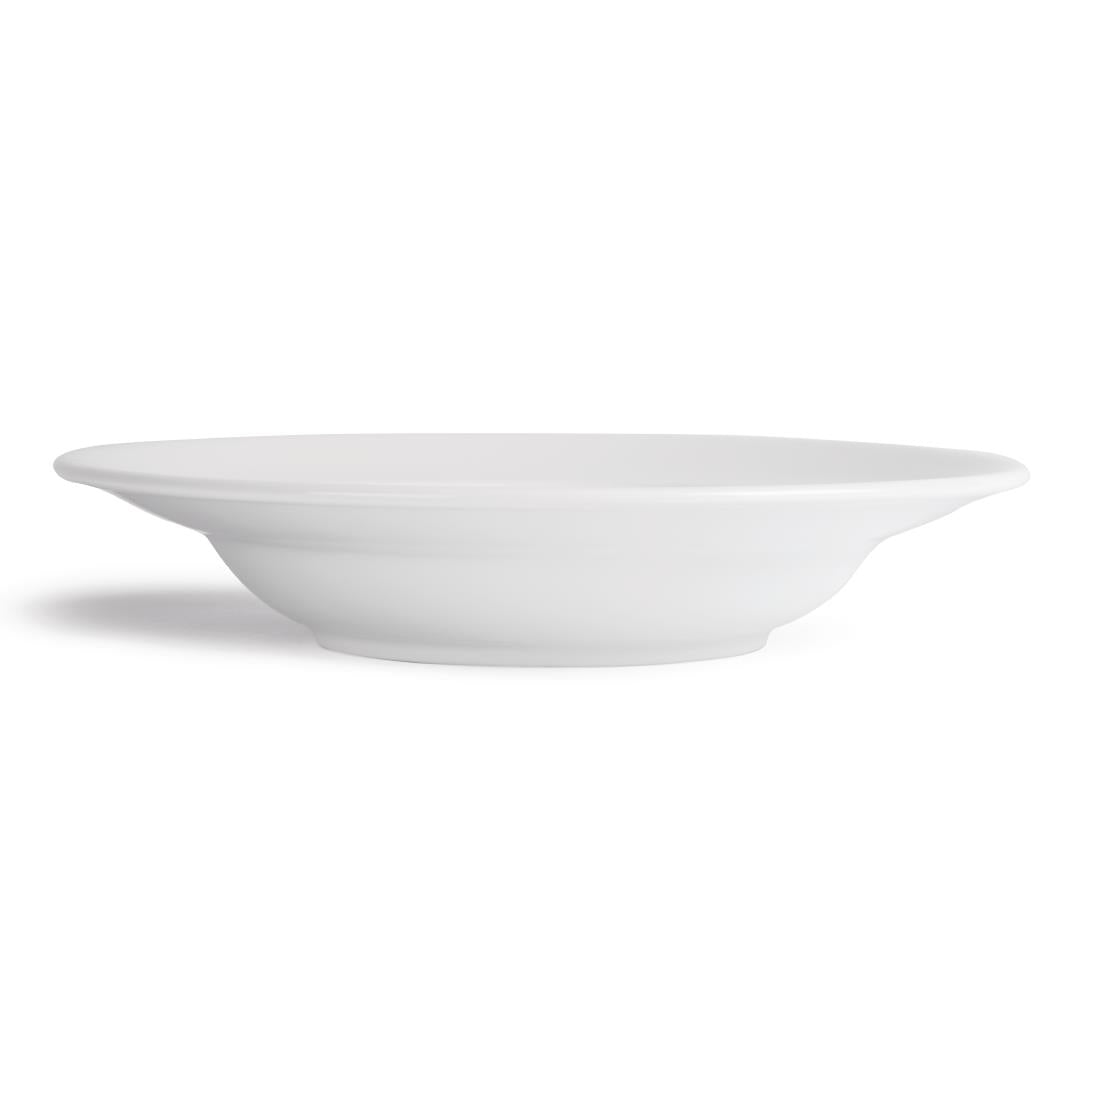 Royal Porcelain Classic White Pasta Plates 260mm (Pack of 12)